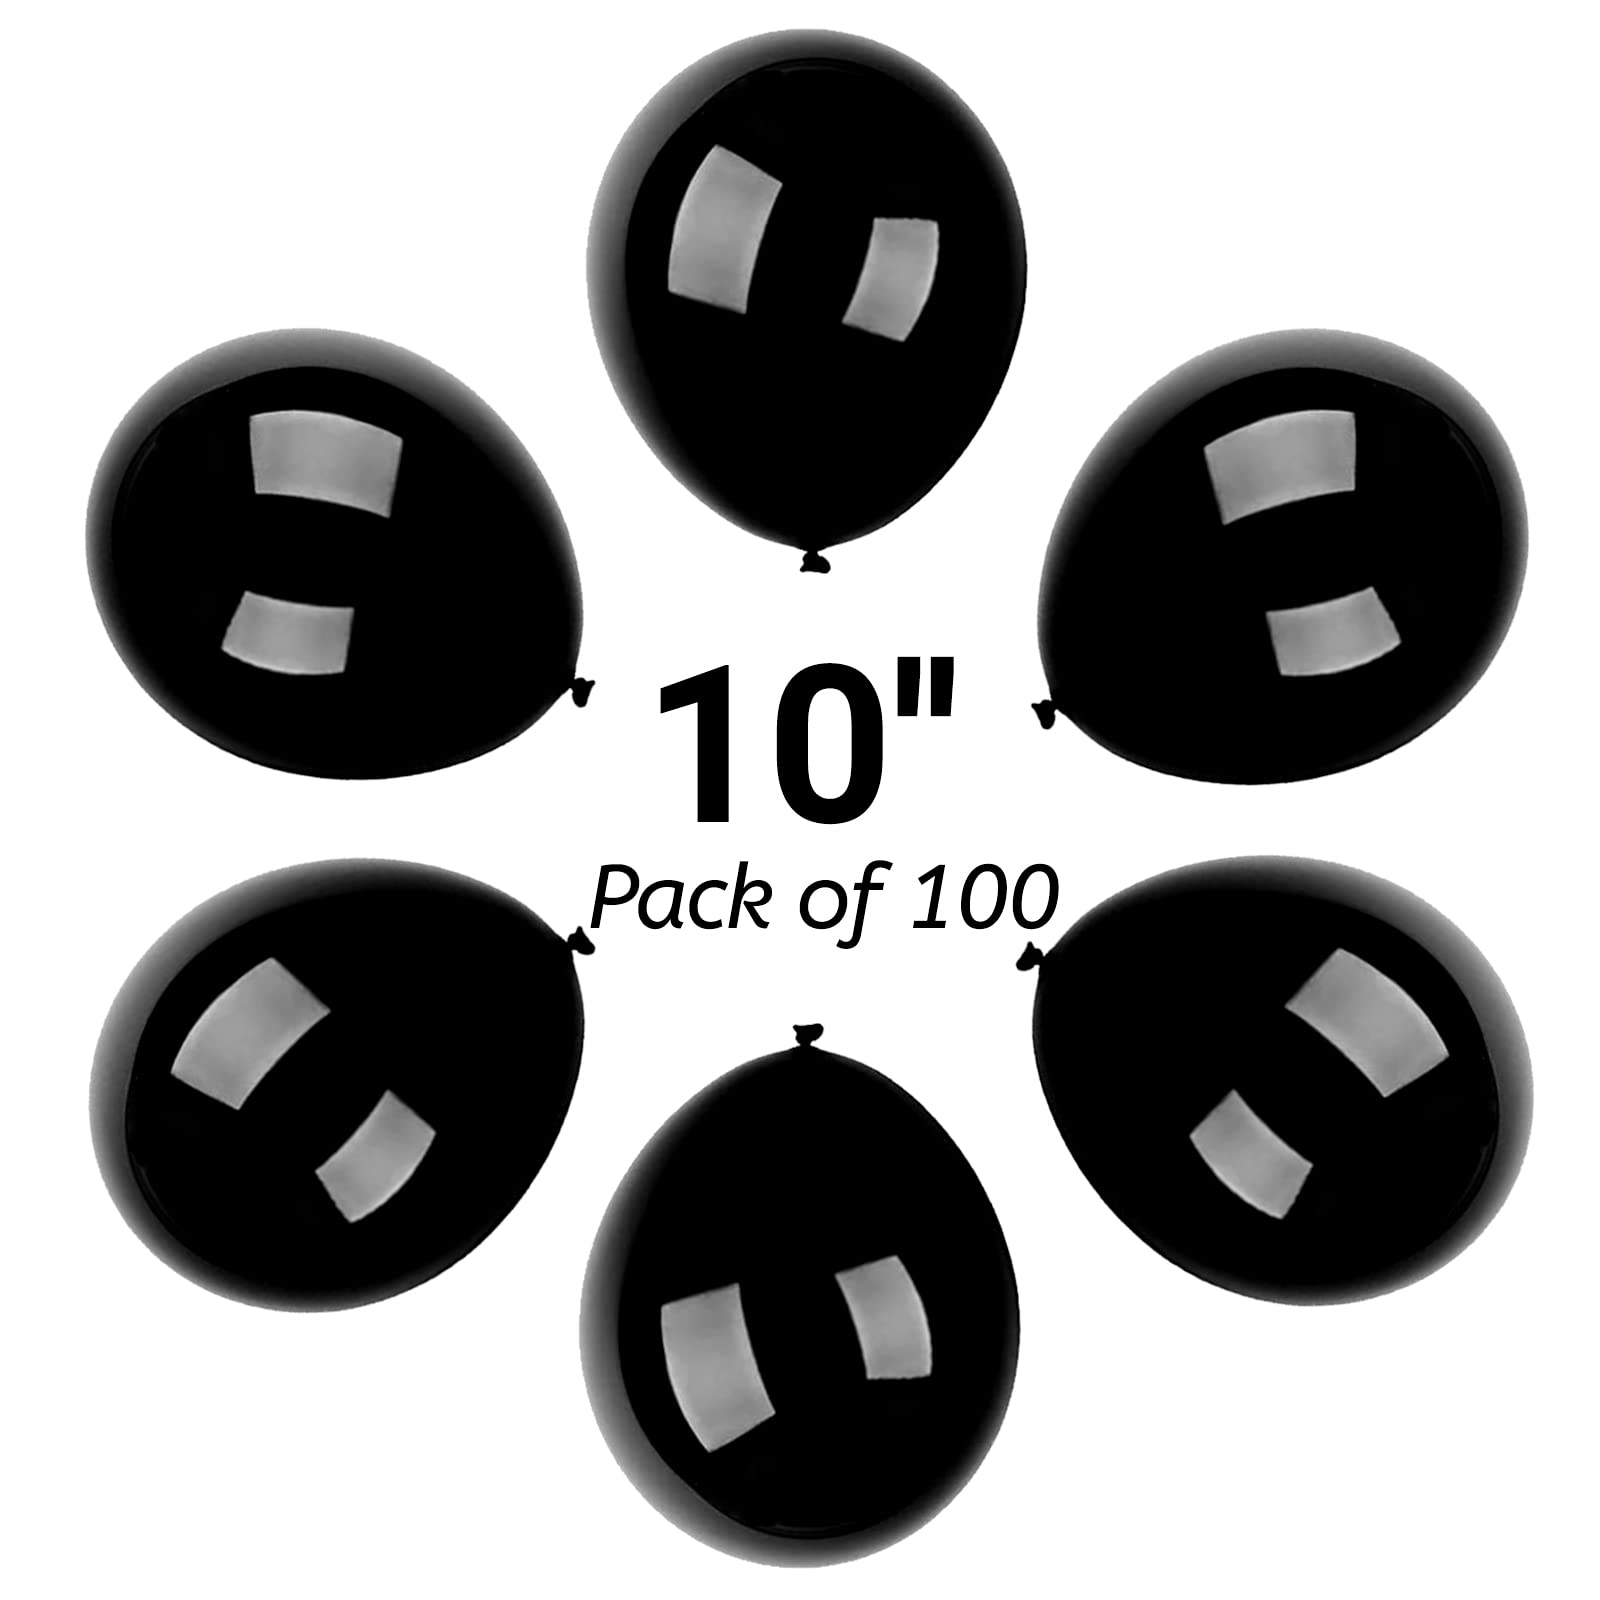 10inch Black Party Balloons 100 pack Strong Thicken Latex Balloons For Happy Birthday, Kids Party, Weddings, Baby Shower Events Decorations Accessories (black, 100 PCS 10 inch)